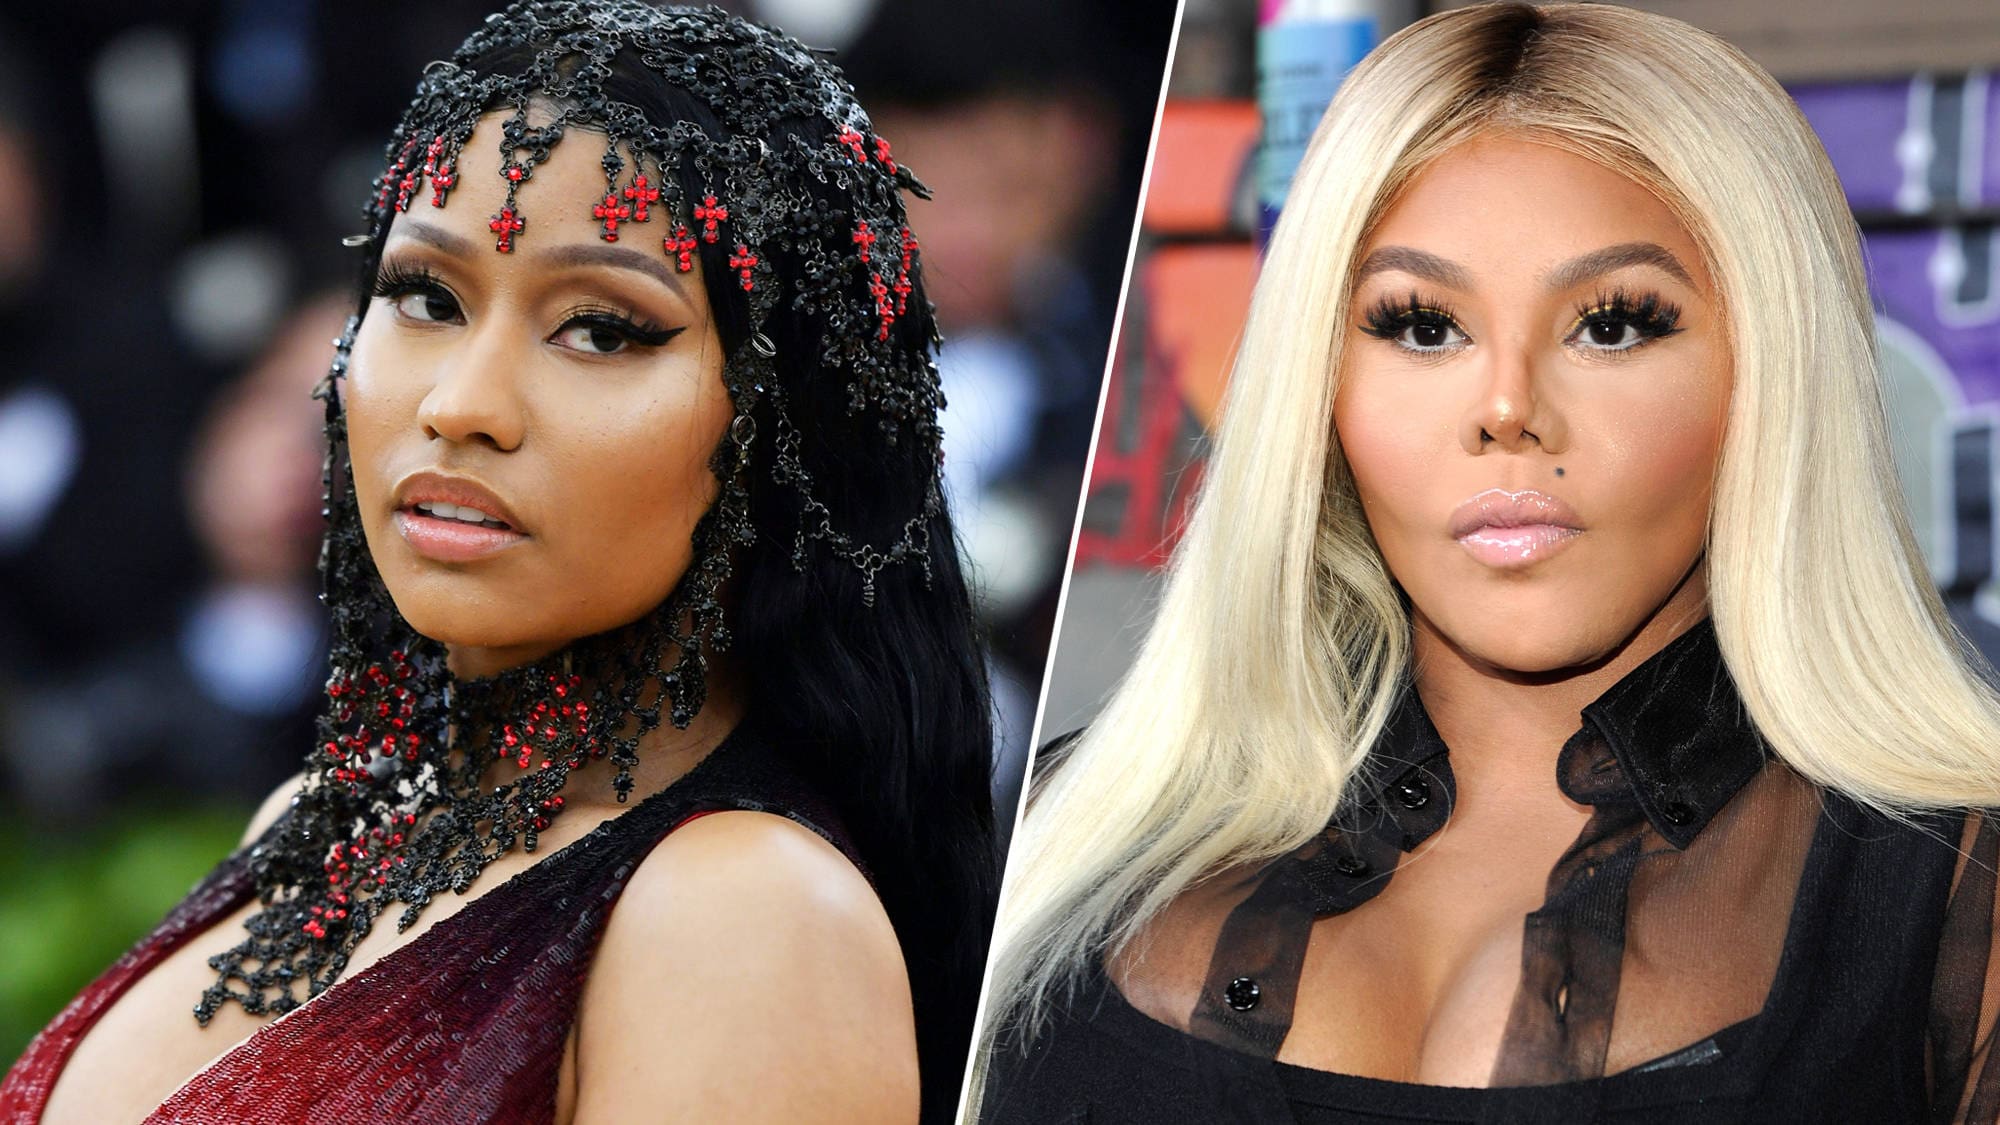 Tamar Braxton's Fans Criticize Her For Some Things She Said About Usher, Lil Kim, And Nicki Minaj